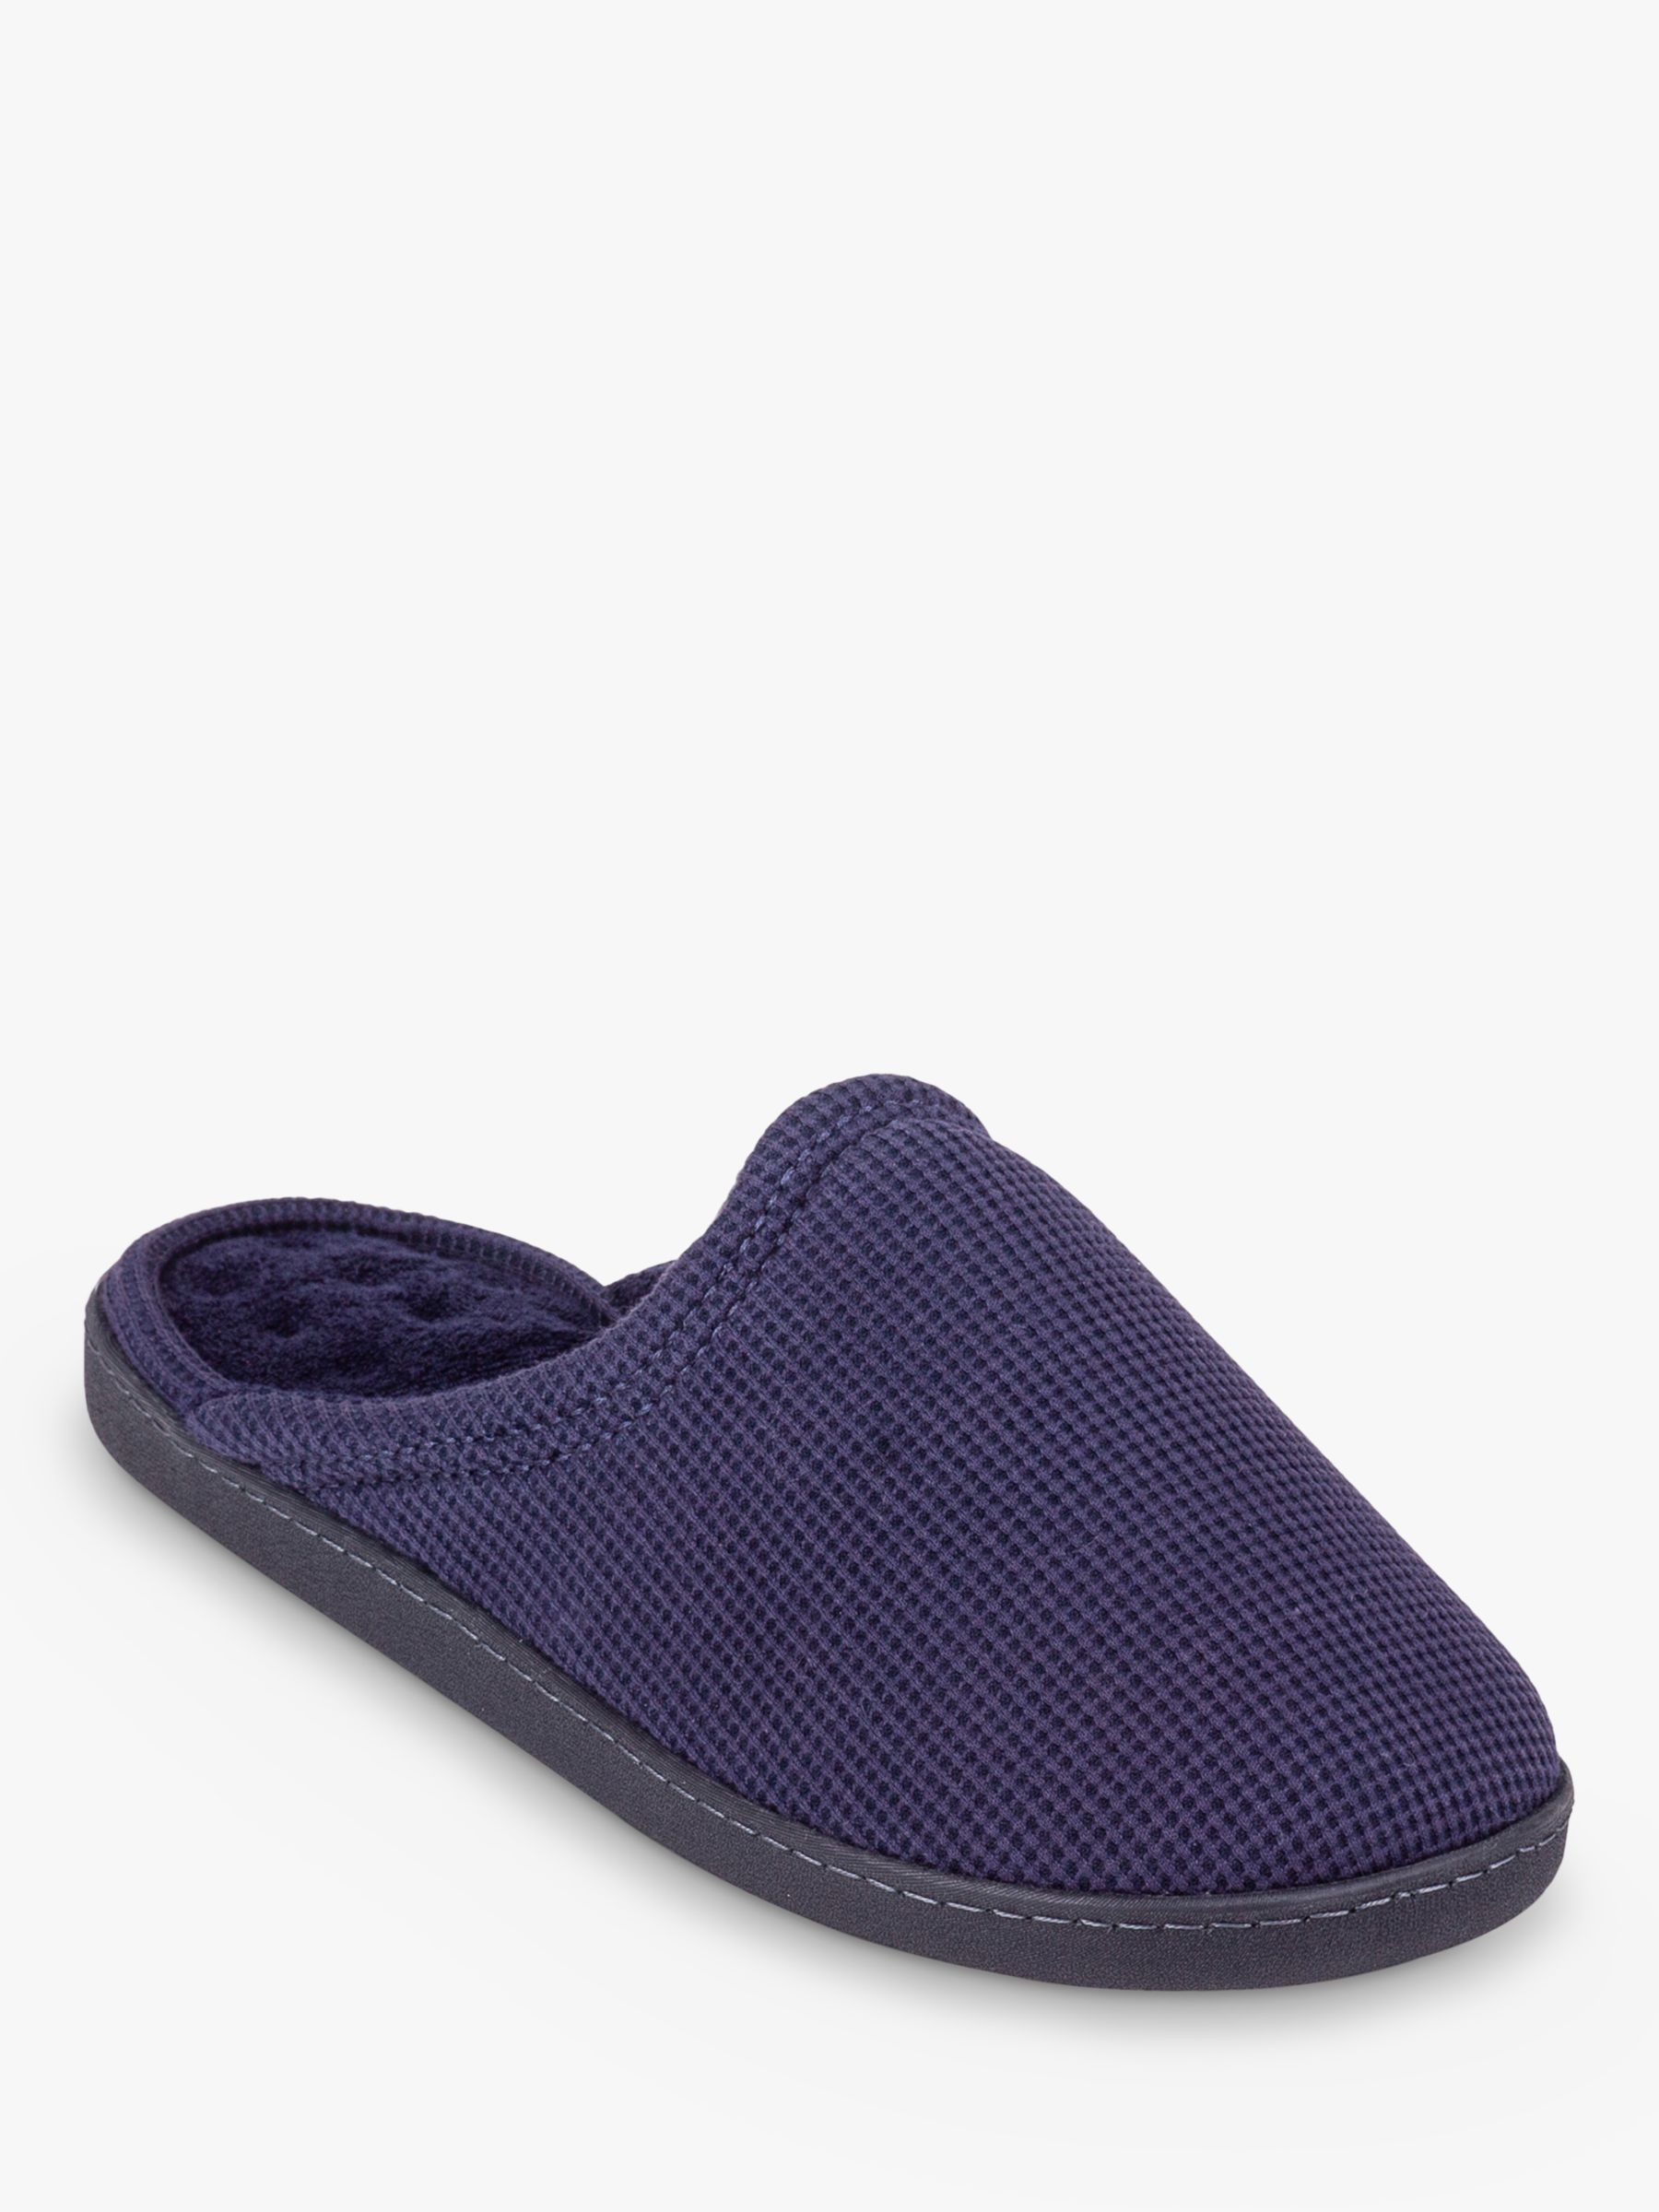 totes Waffle Mule Slippers, Navy at John Lewis & Partners